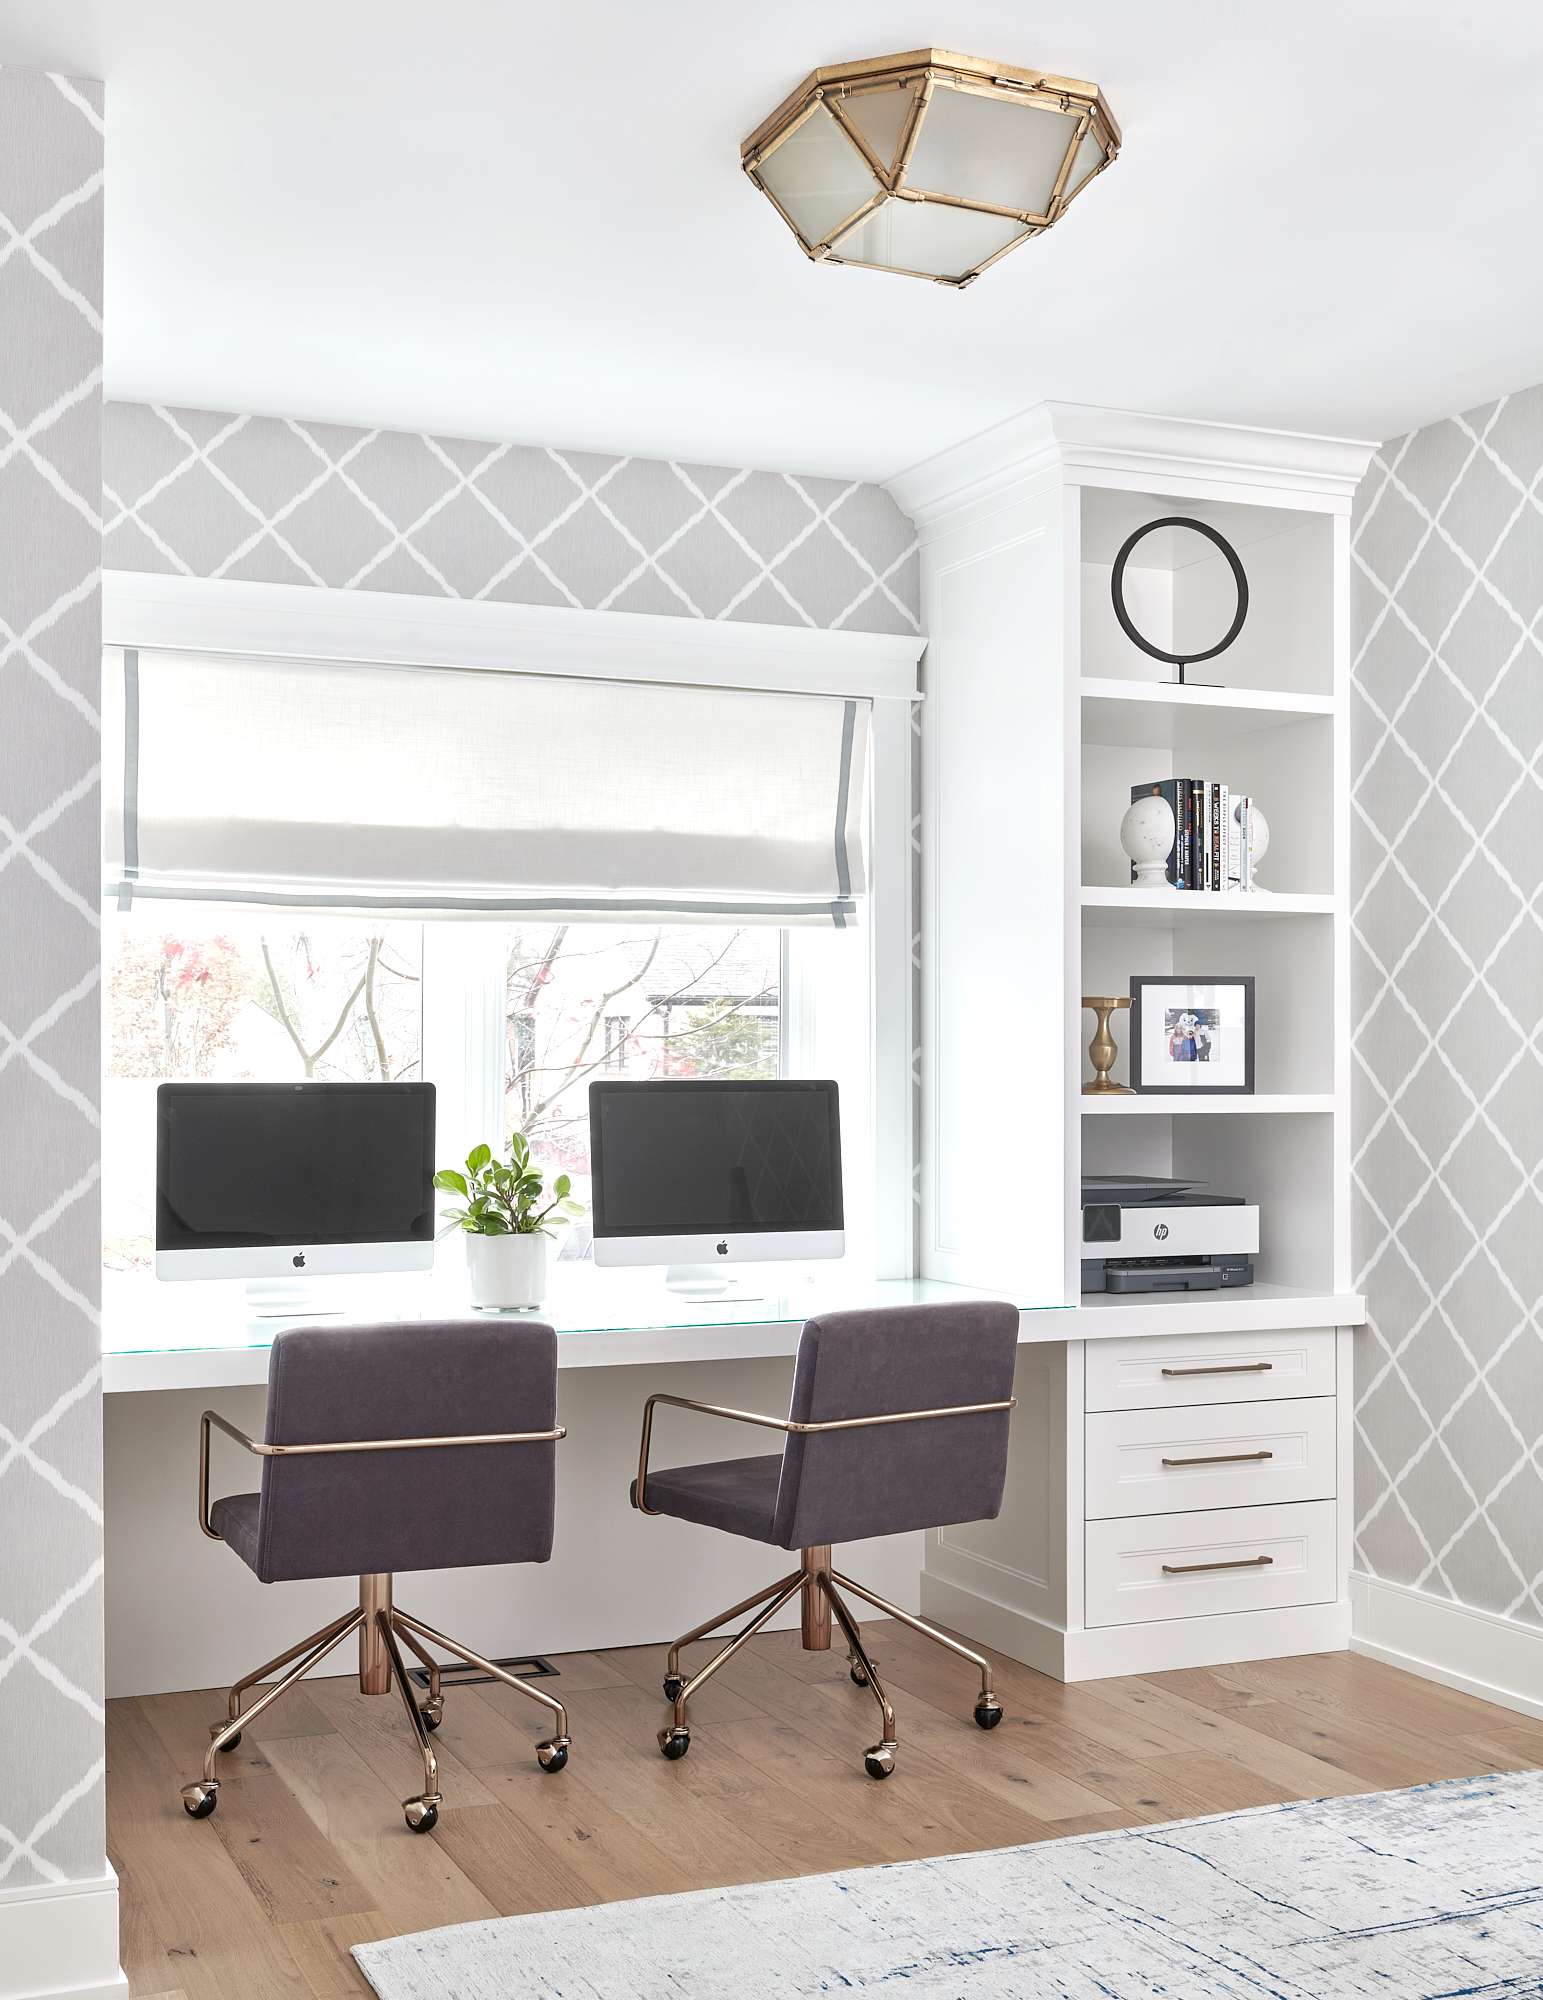 Office interior design project showing custom desk area with open shelving and two grey and gold swivel chairs